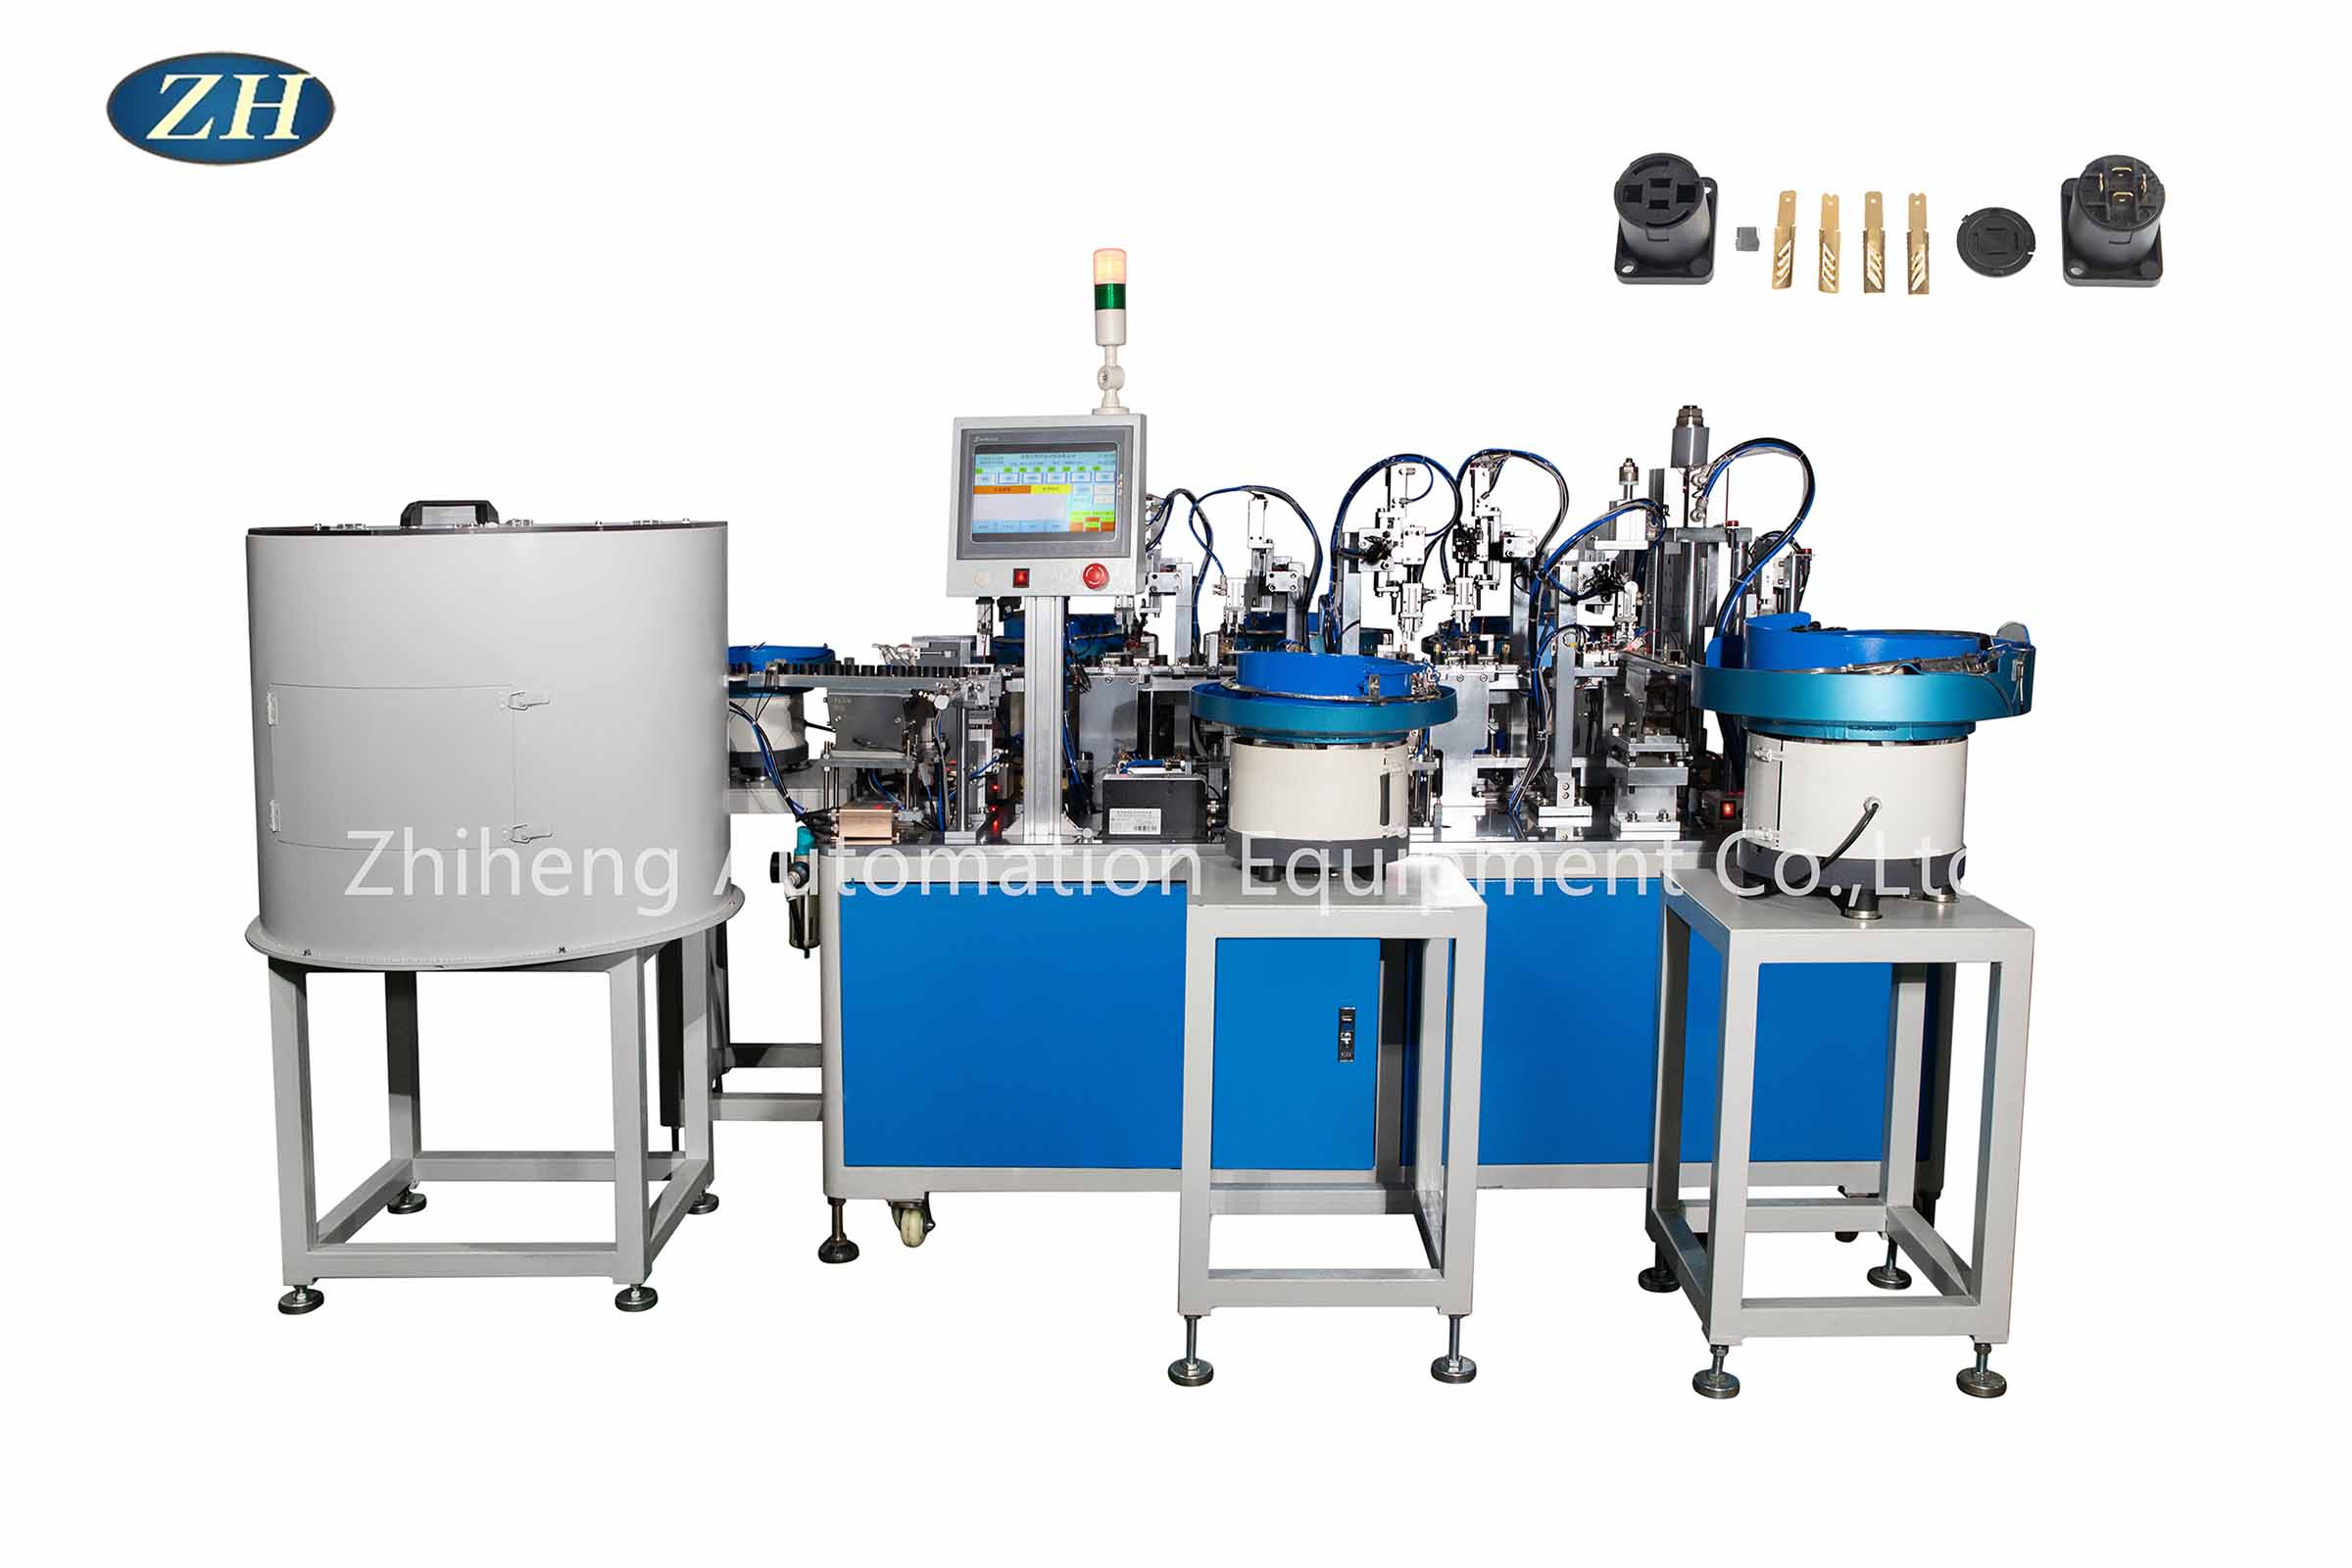 Automatic Assembly Machine for Connector Plug